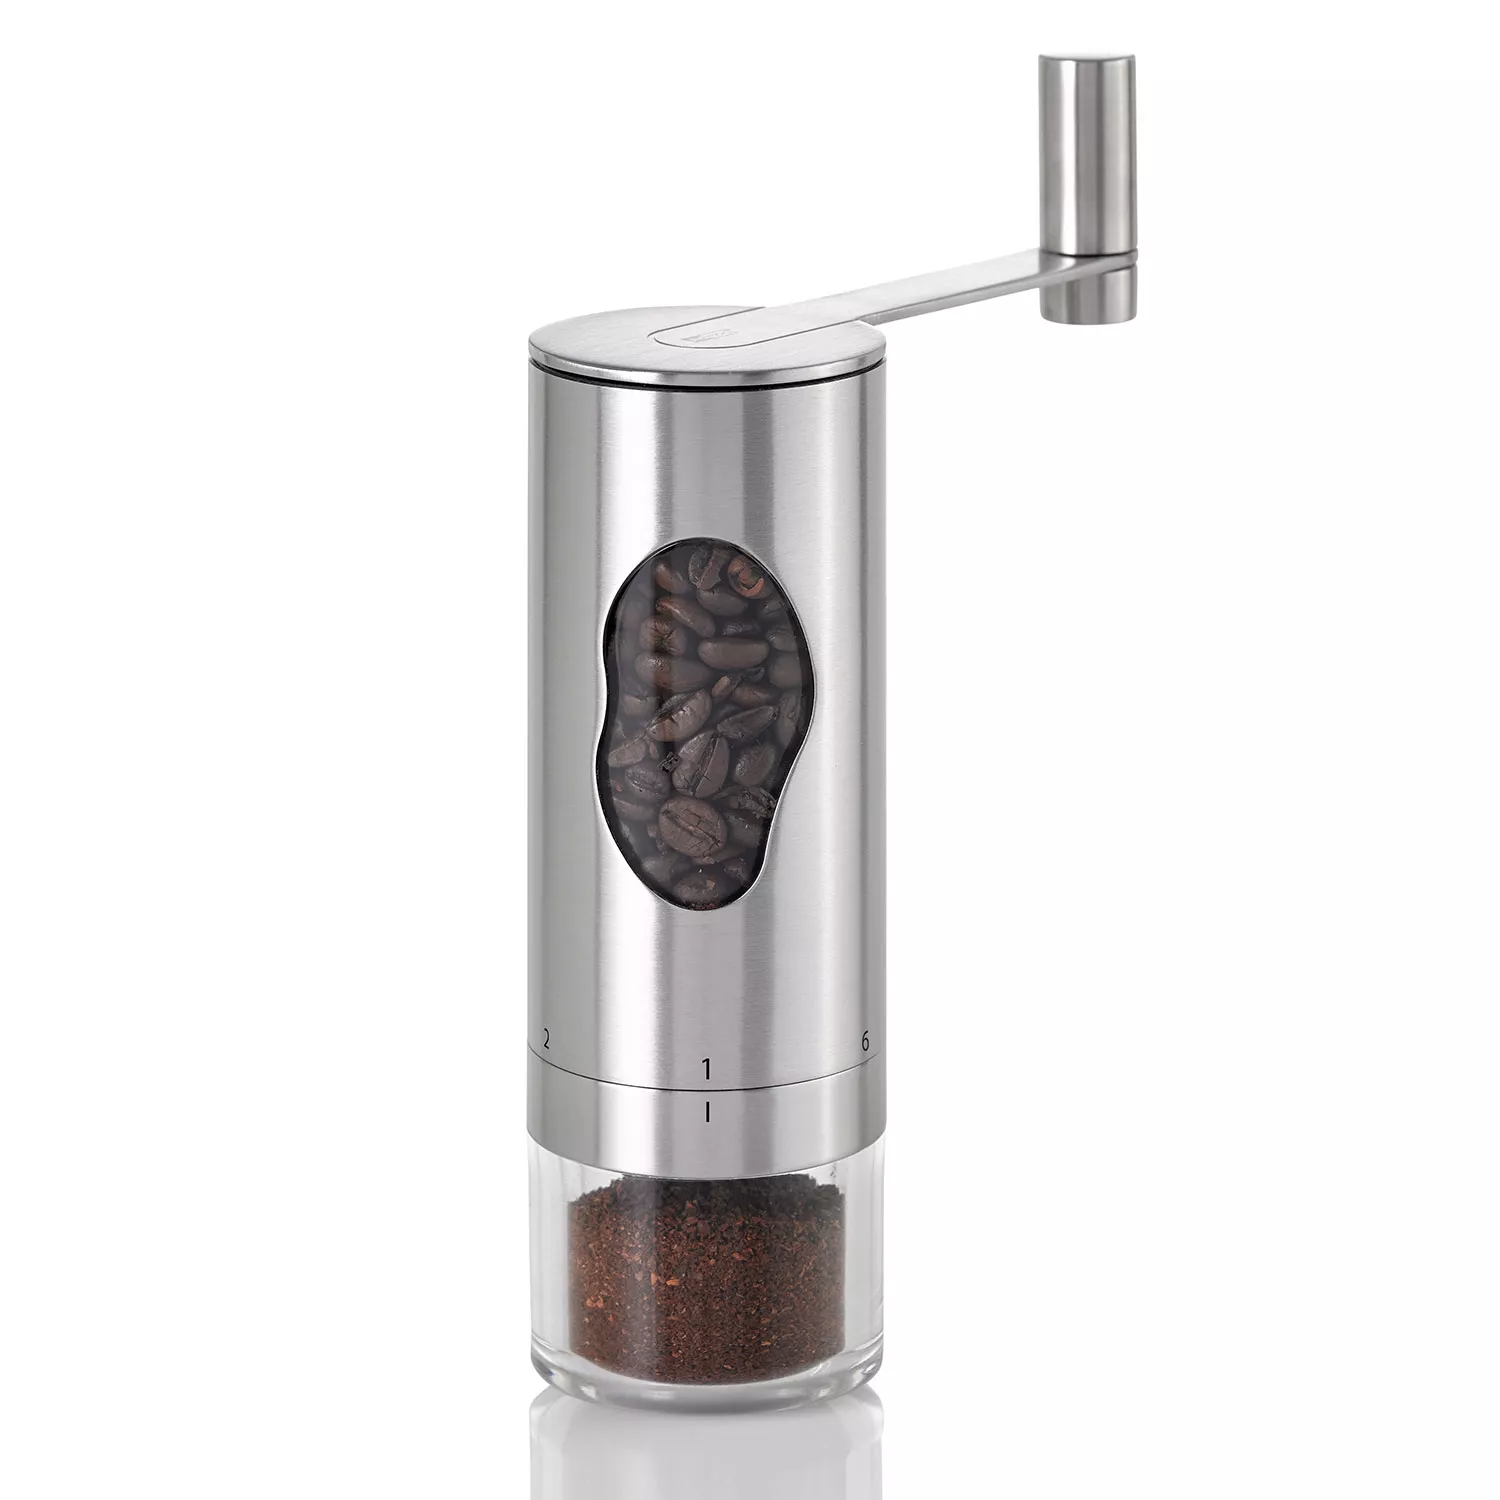 Portable Electric Coffee Grinder Food Grinding Machine Pepper Mill